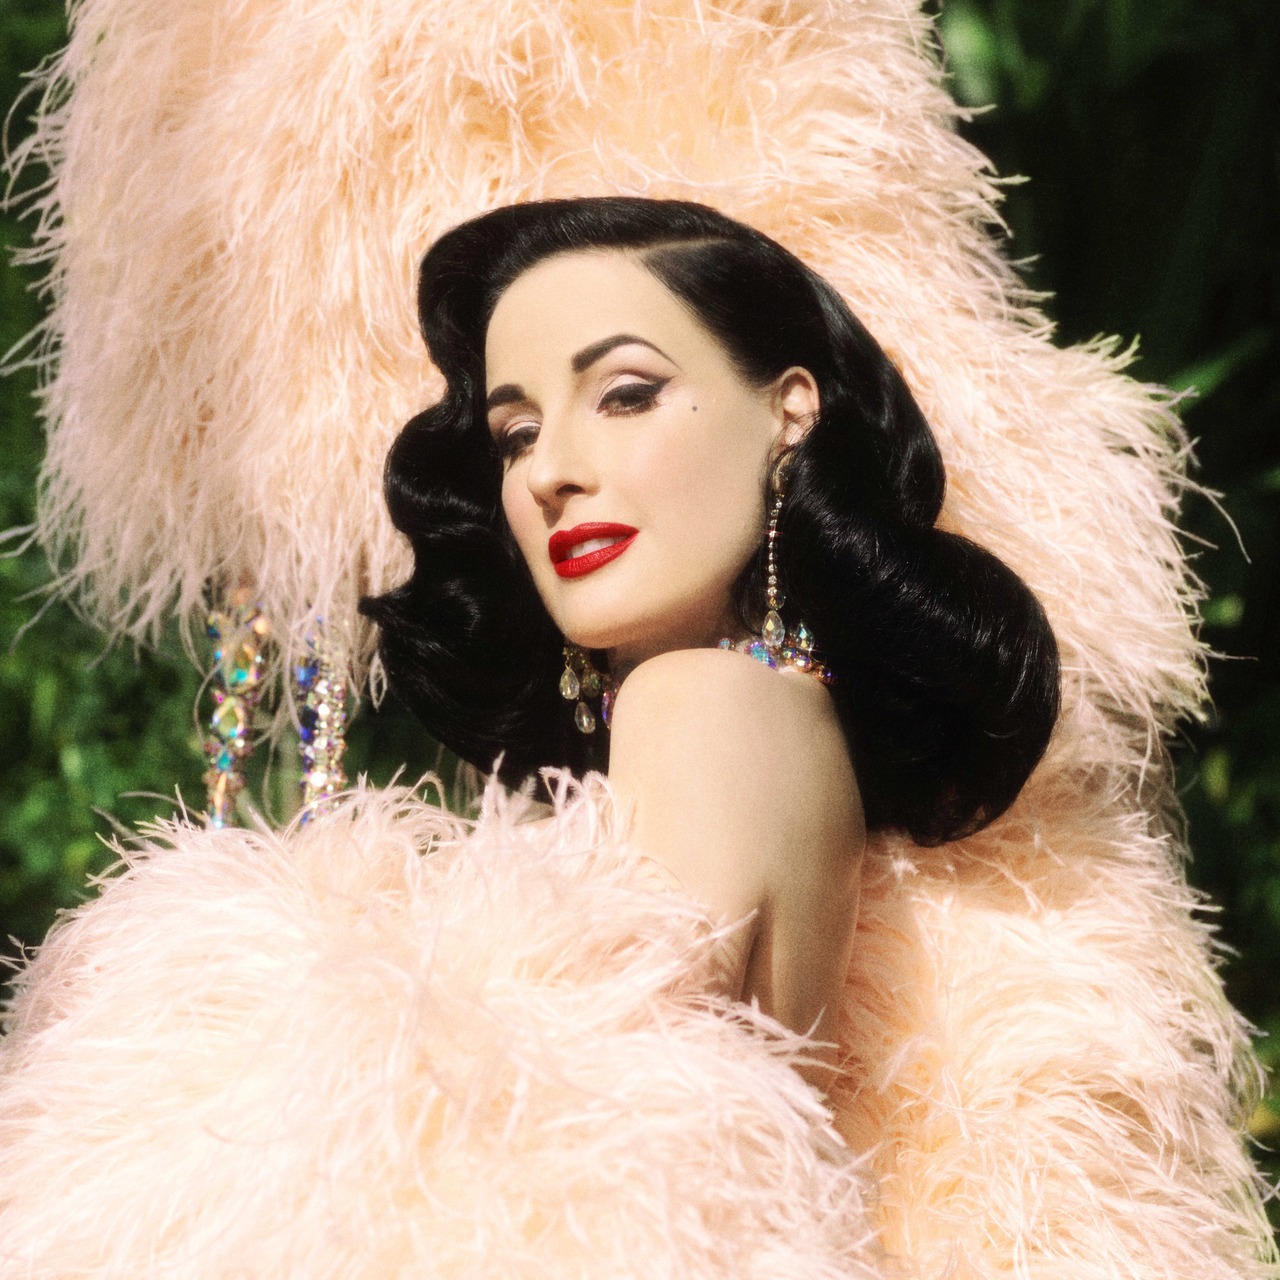 Top 100+ Images dita von teese and the copper coupe burlesque revue Completed